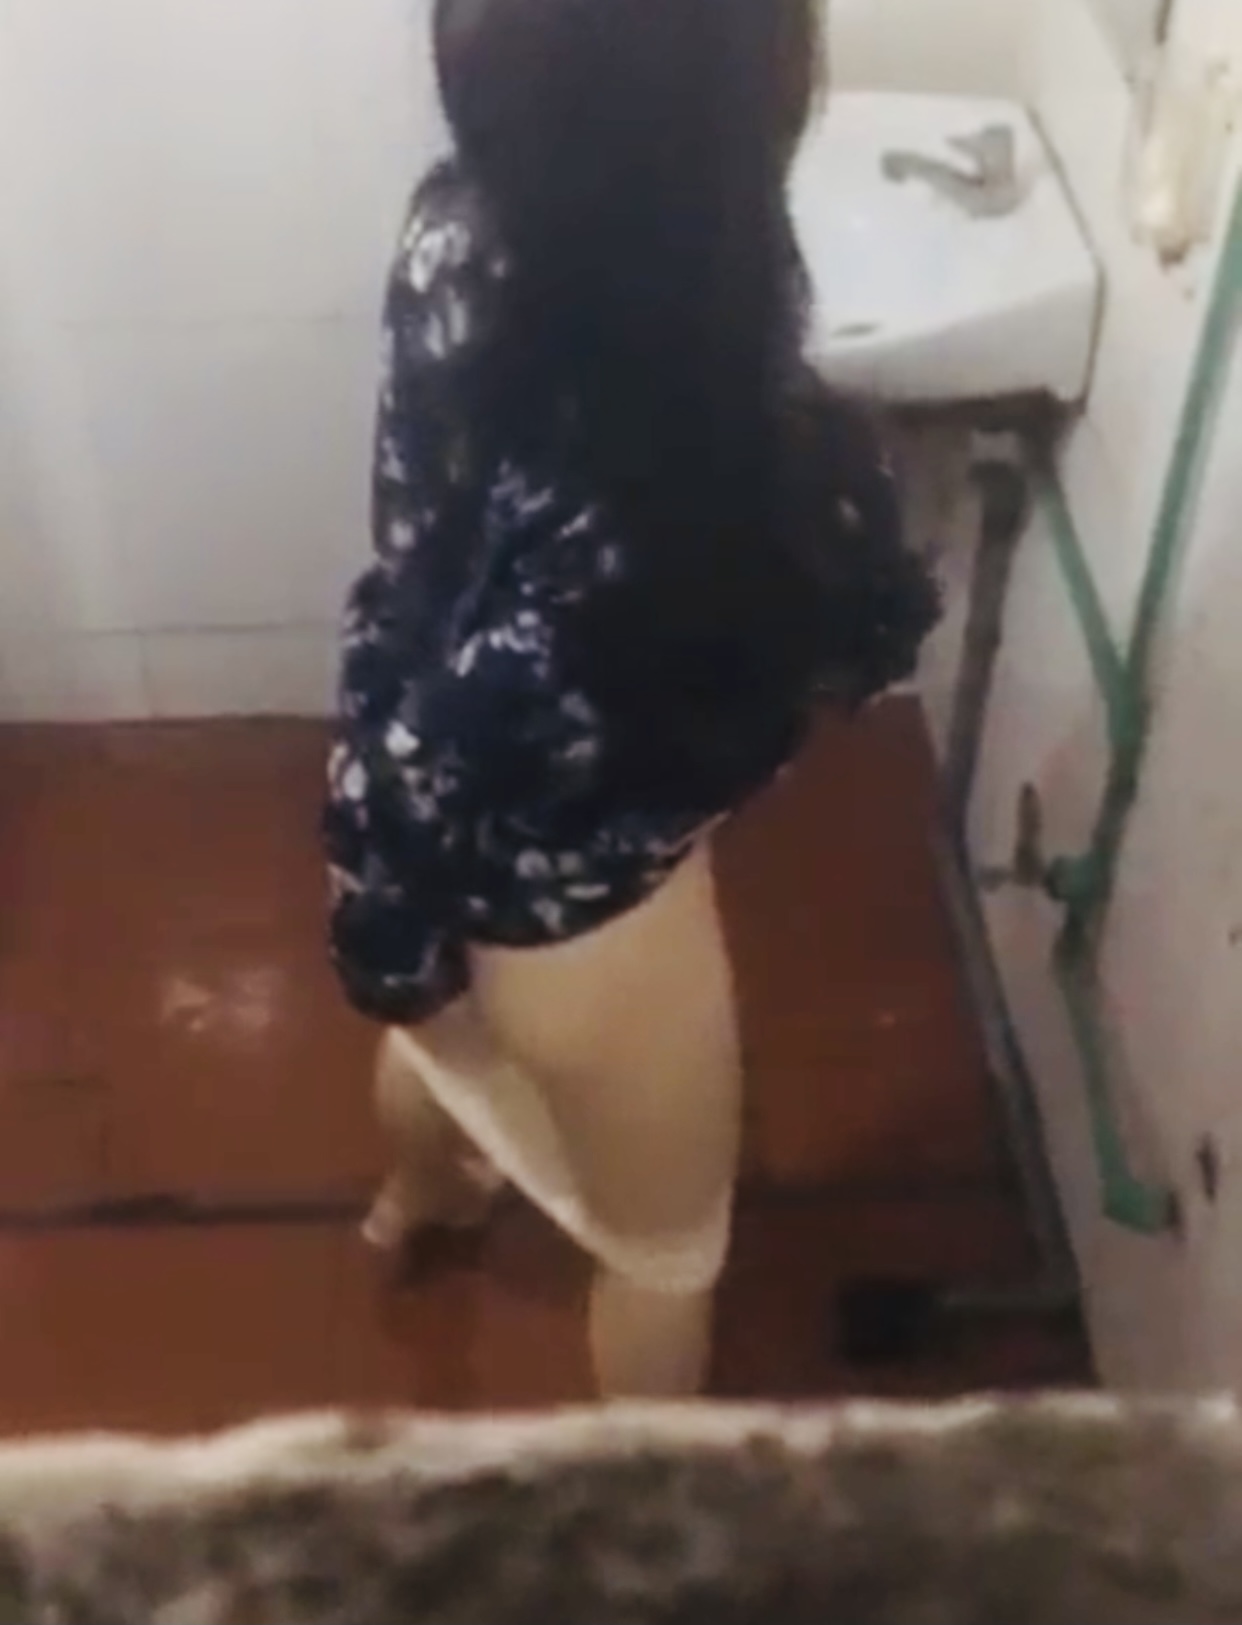 Girl pissing at cafe toilet